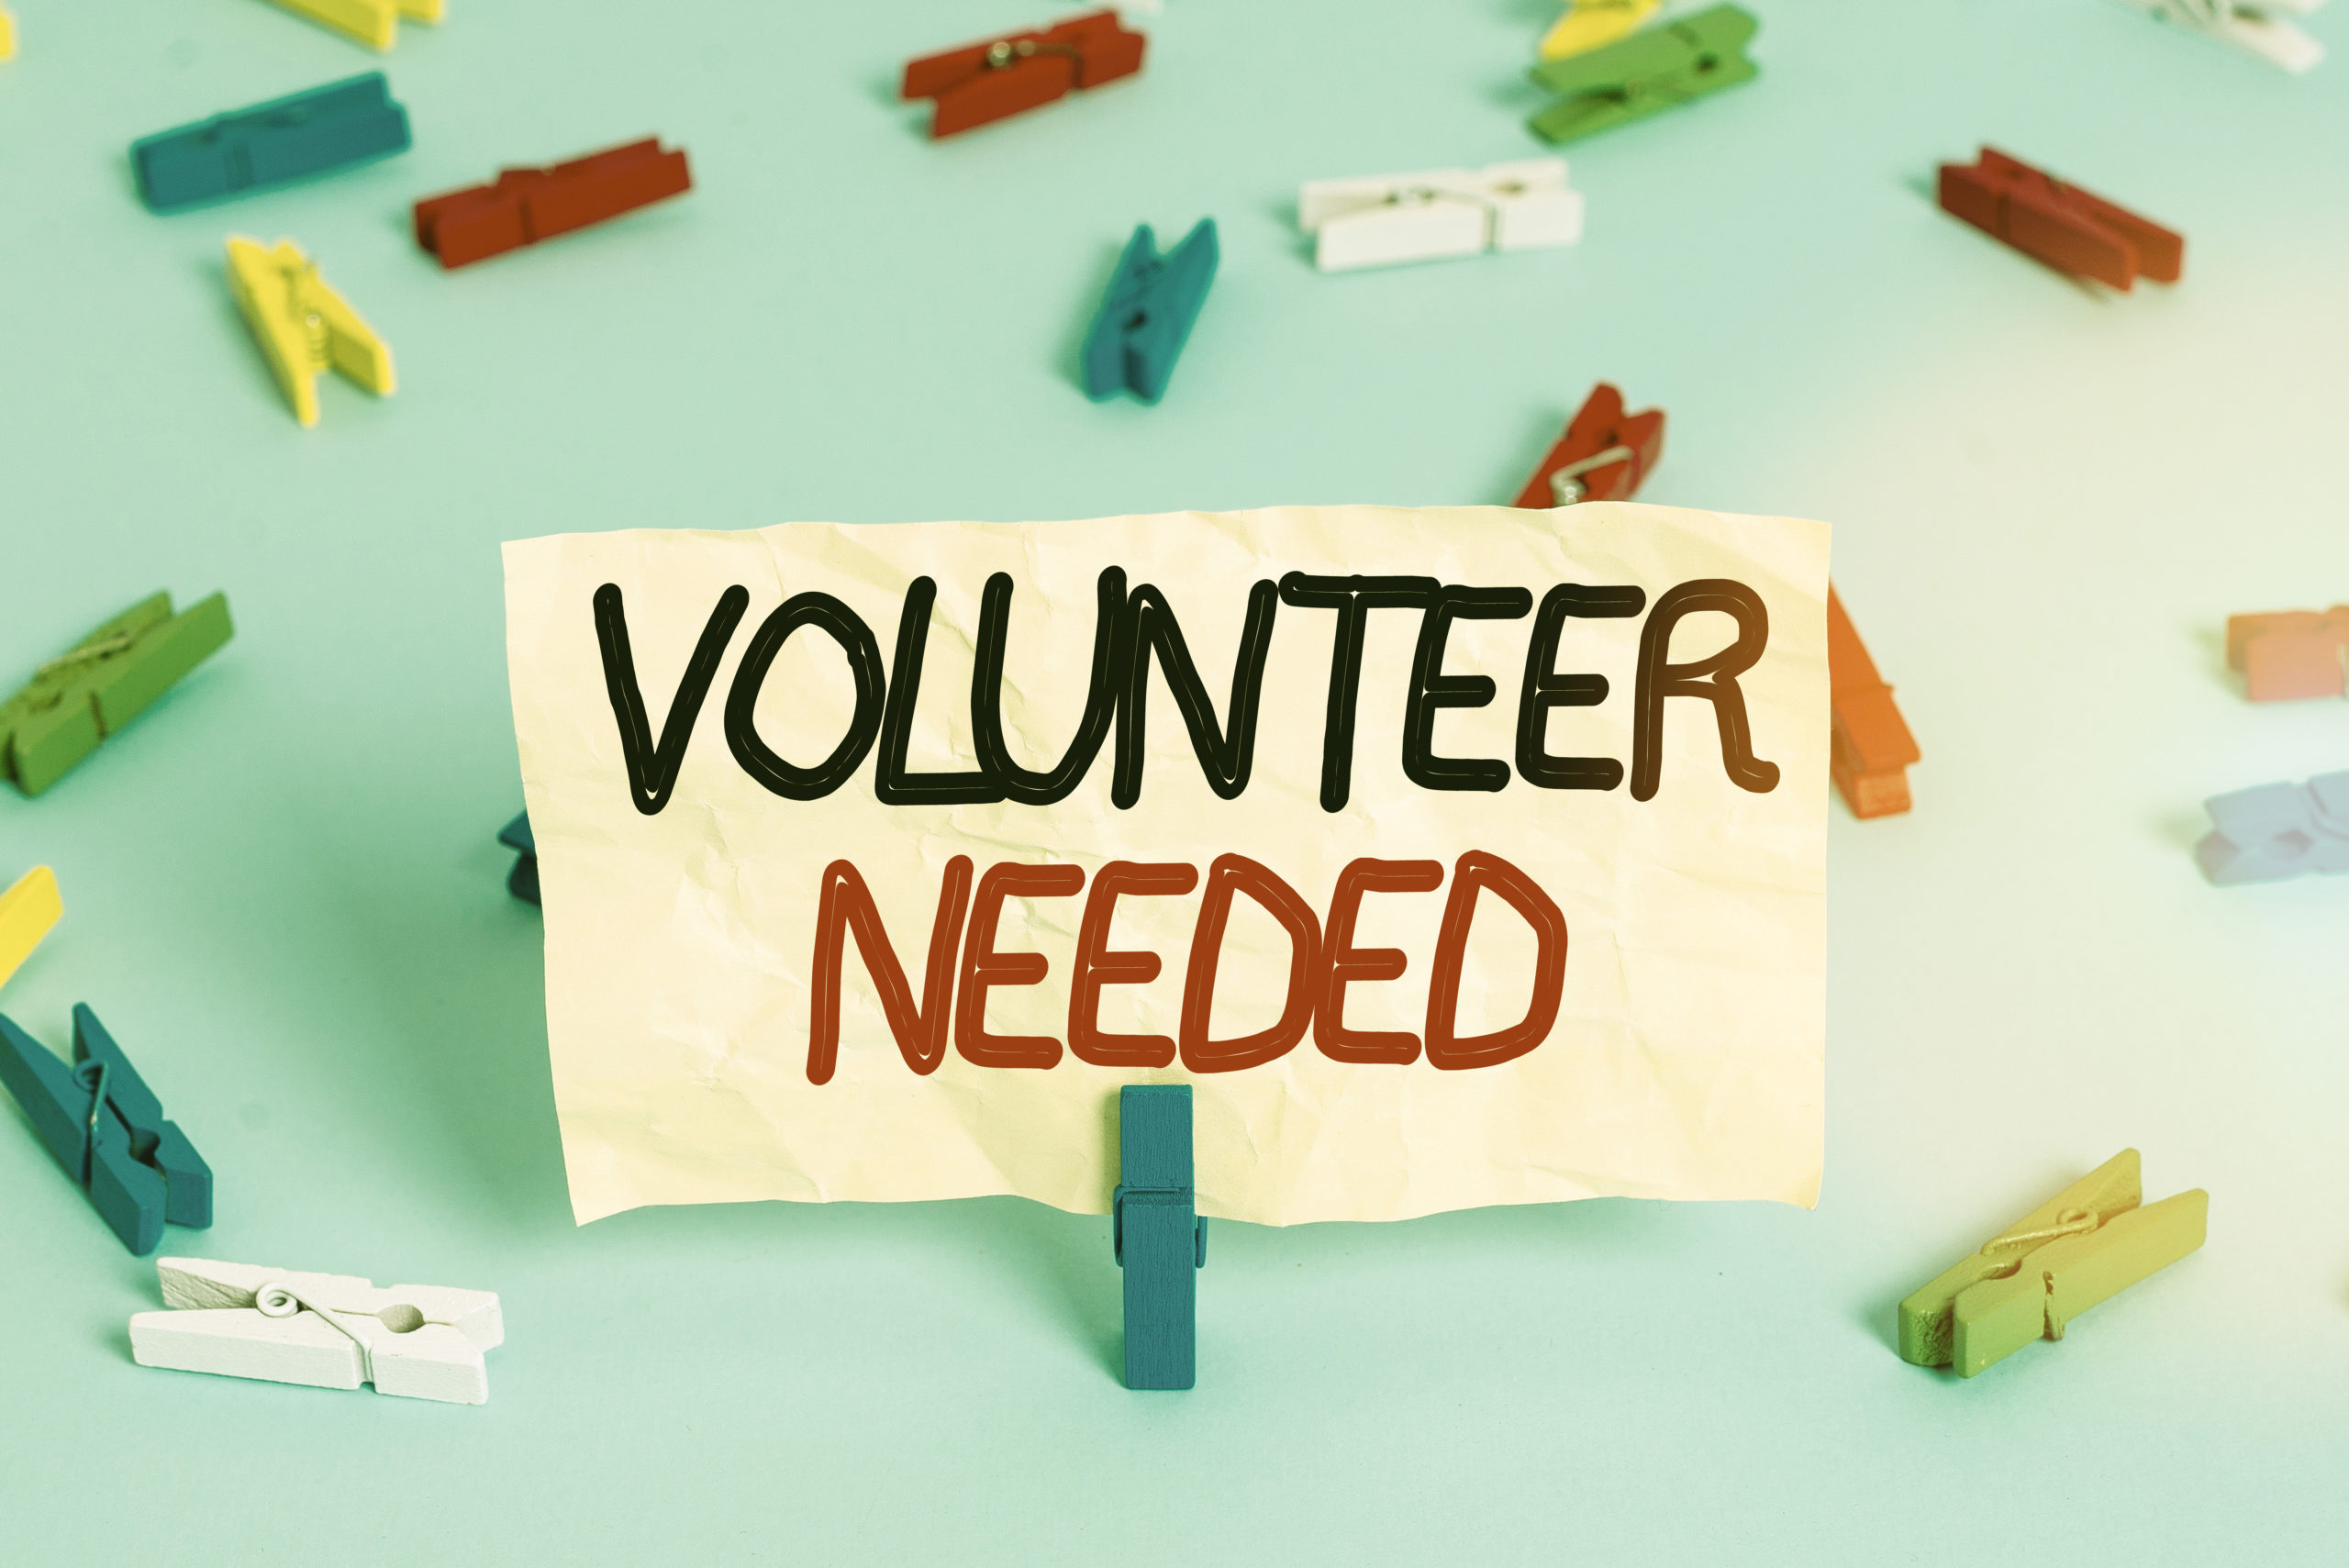 "Volunteer Needed" written on a piece of paper surrounded by clothespins